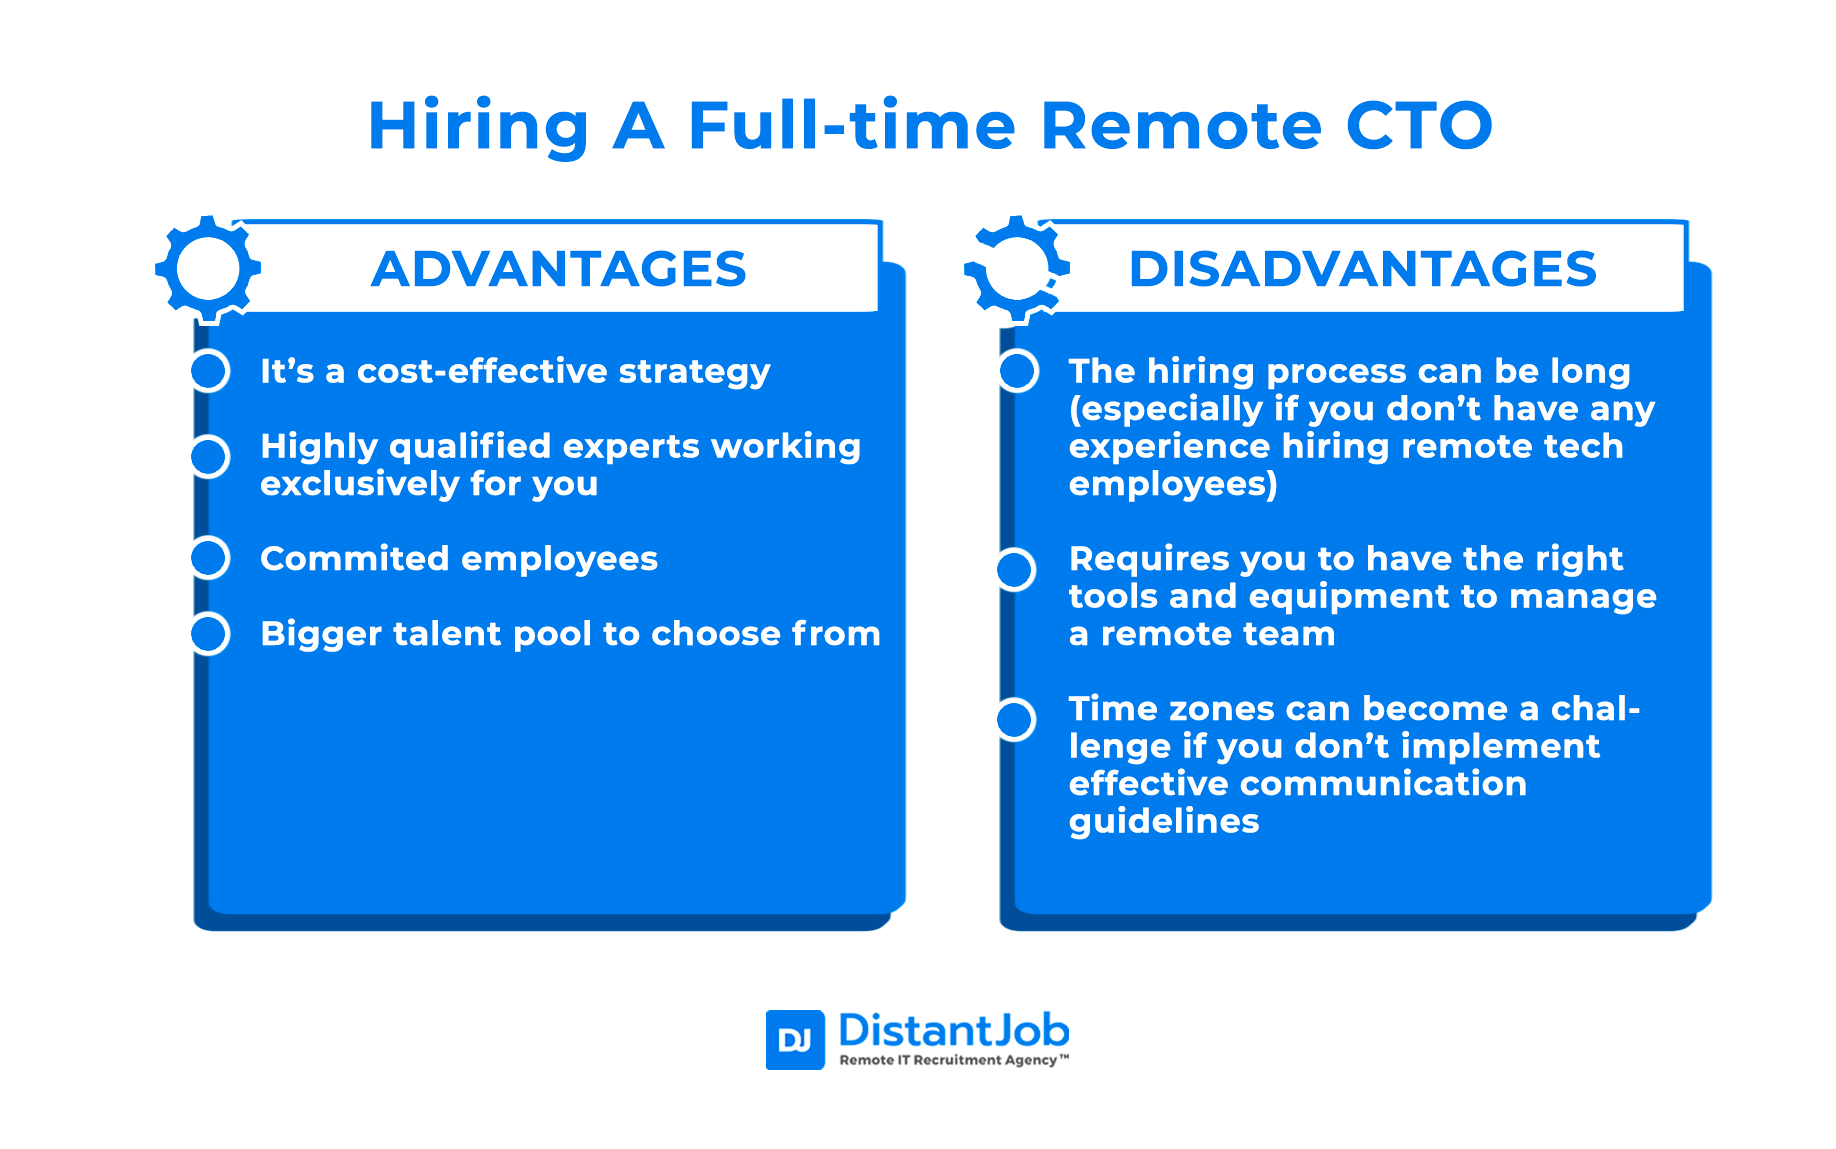 advantages and disadvantages of hiring a full time remote CTO